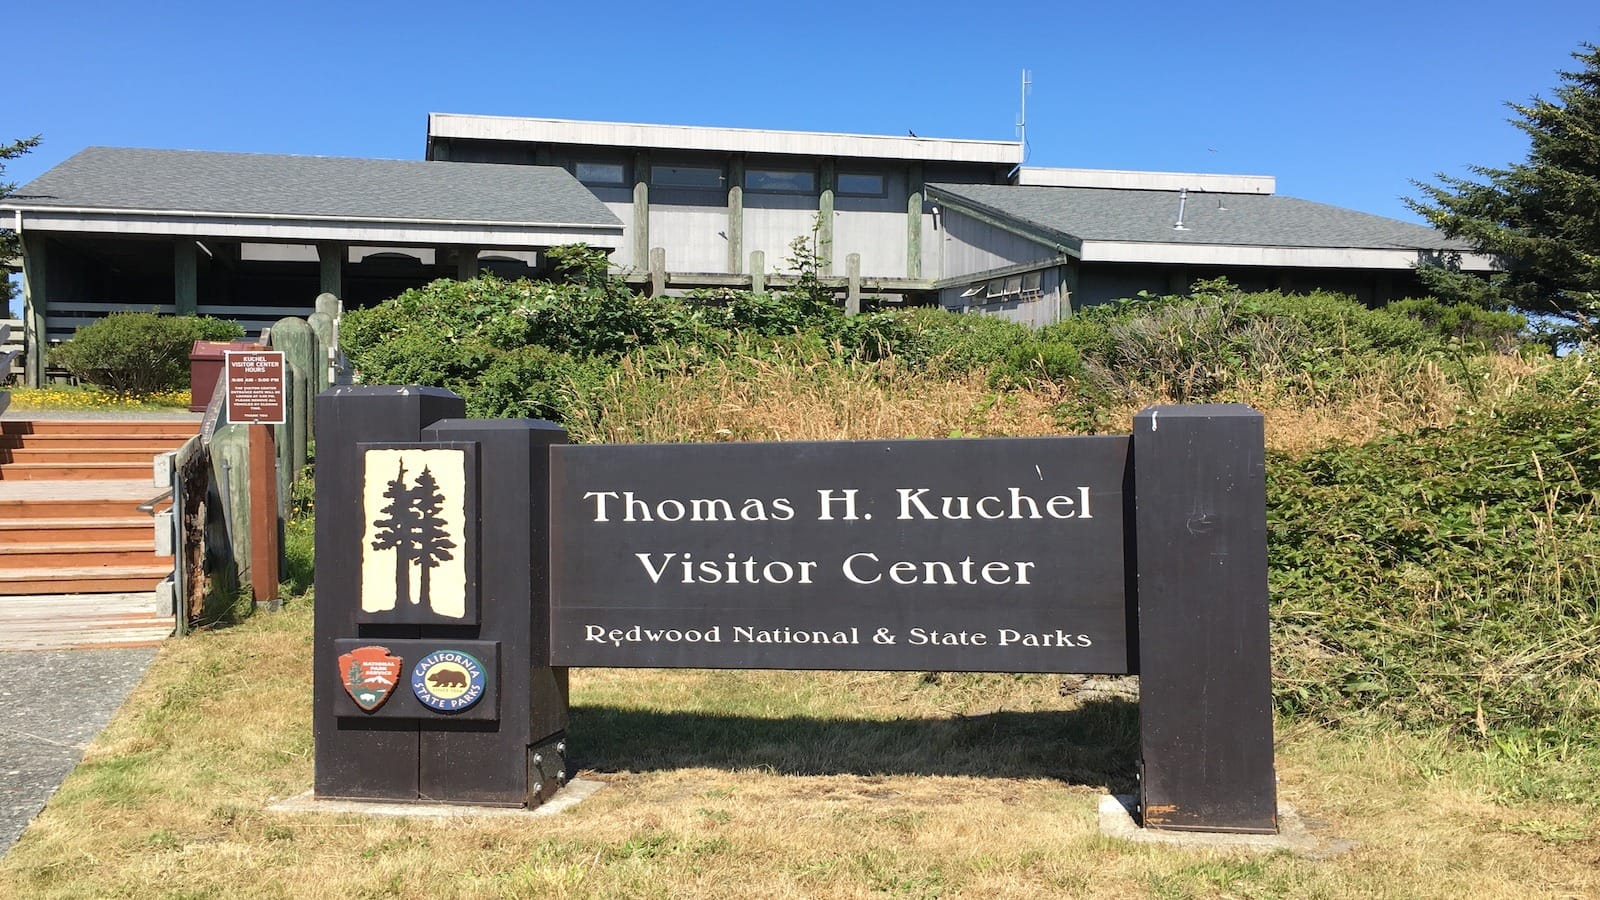 thomas h kuchel visitor center_redwood state and national Park_800x450_nps